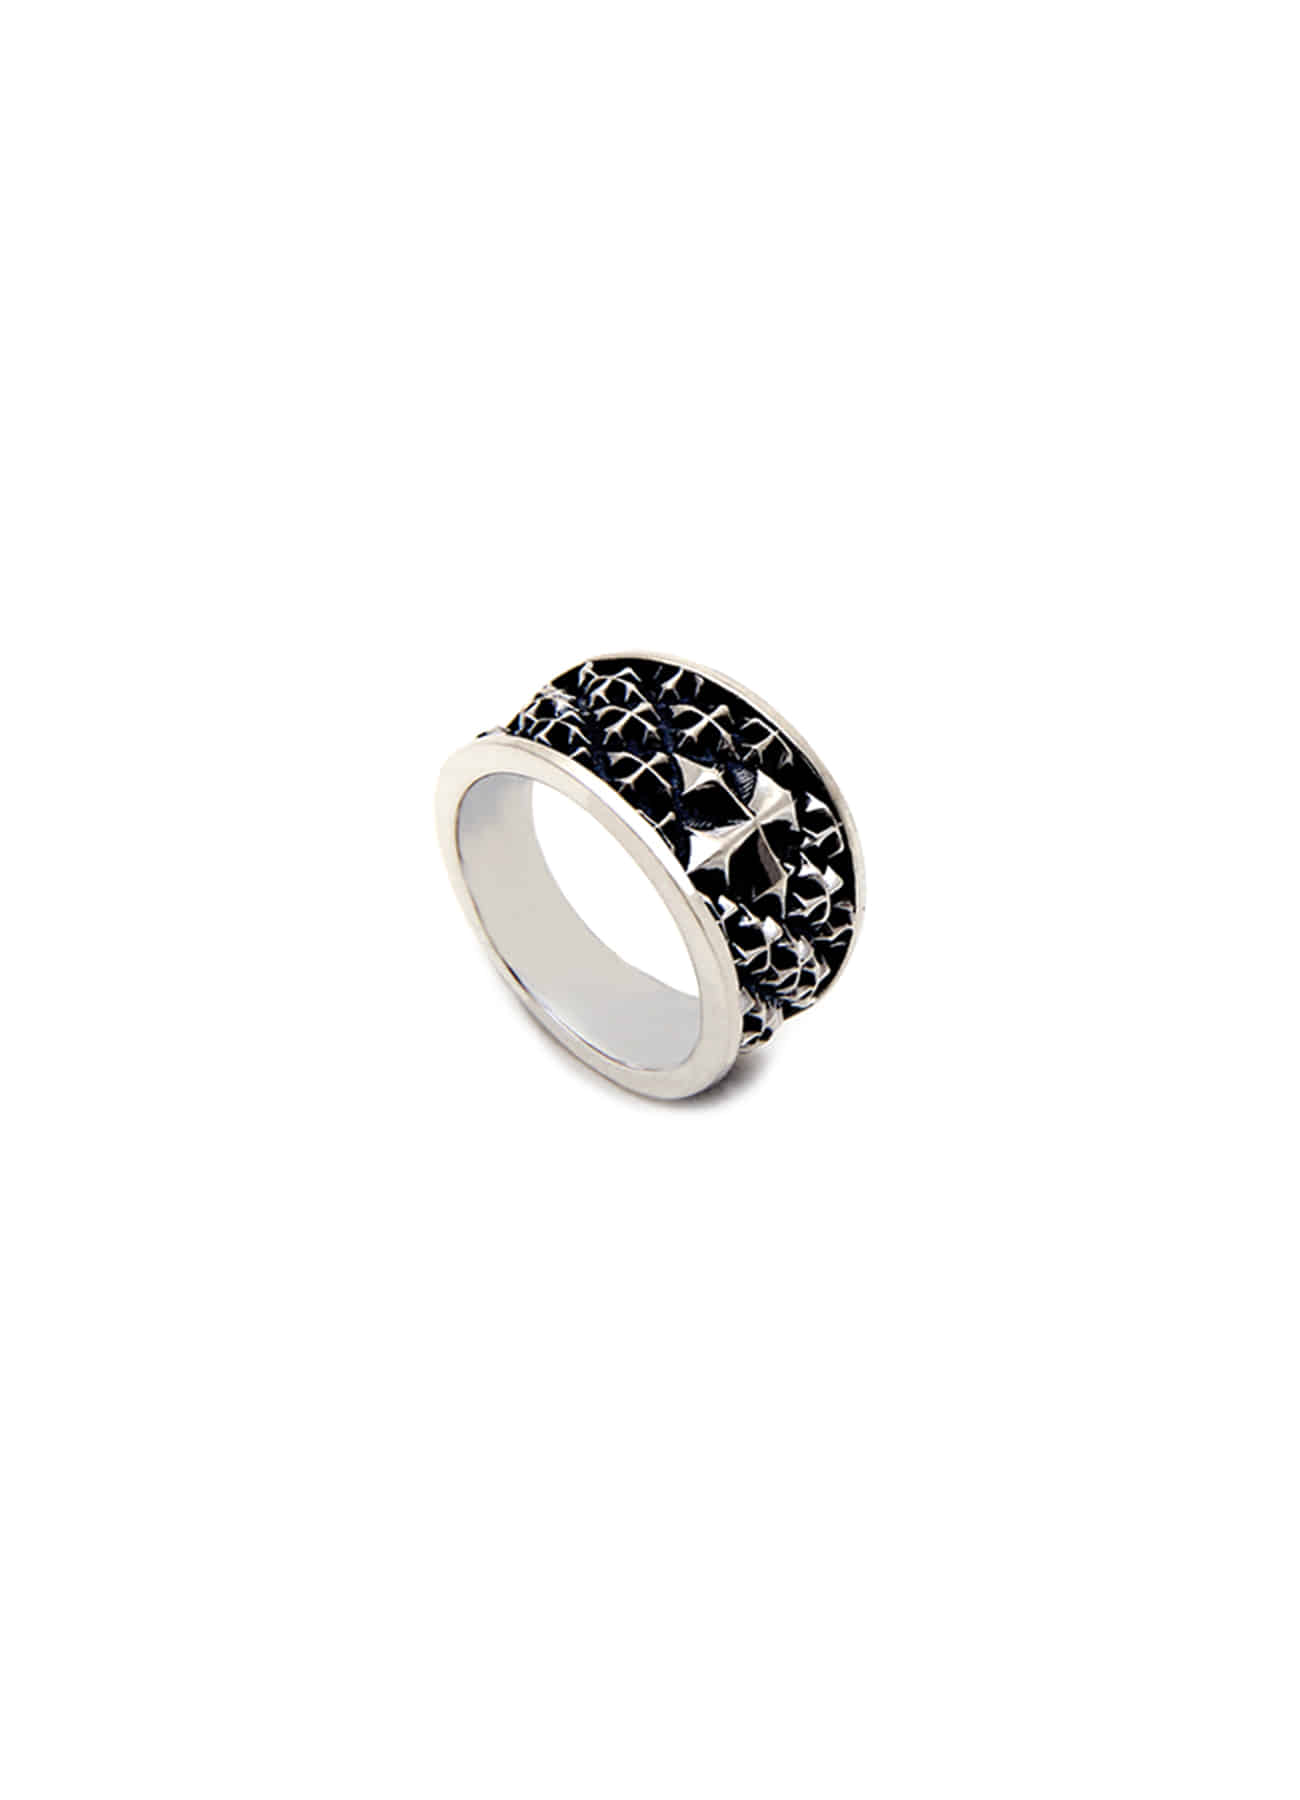 CROSS OVER SILVER RING